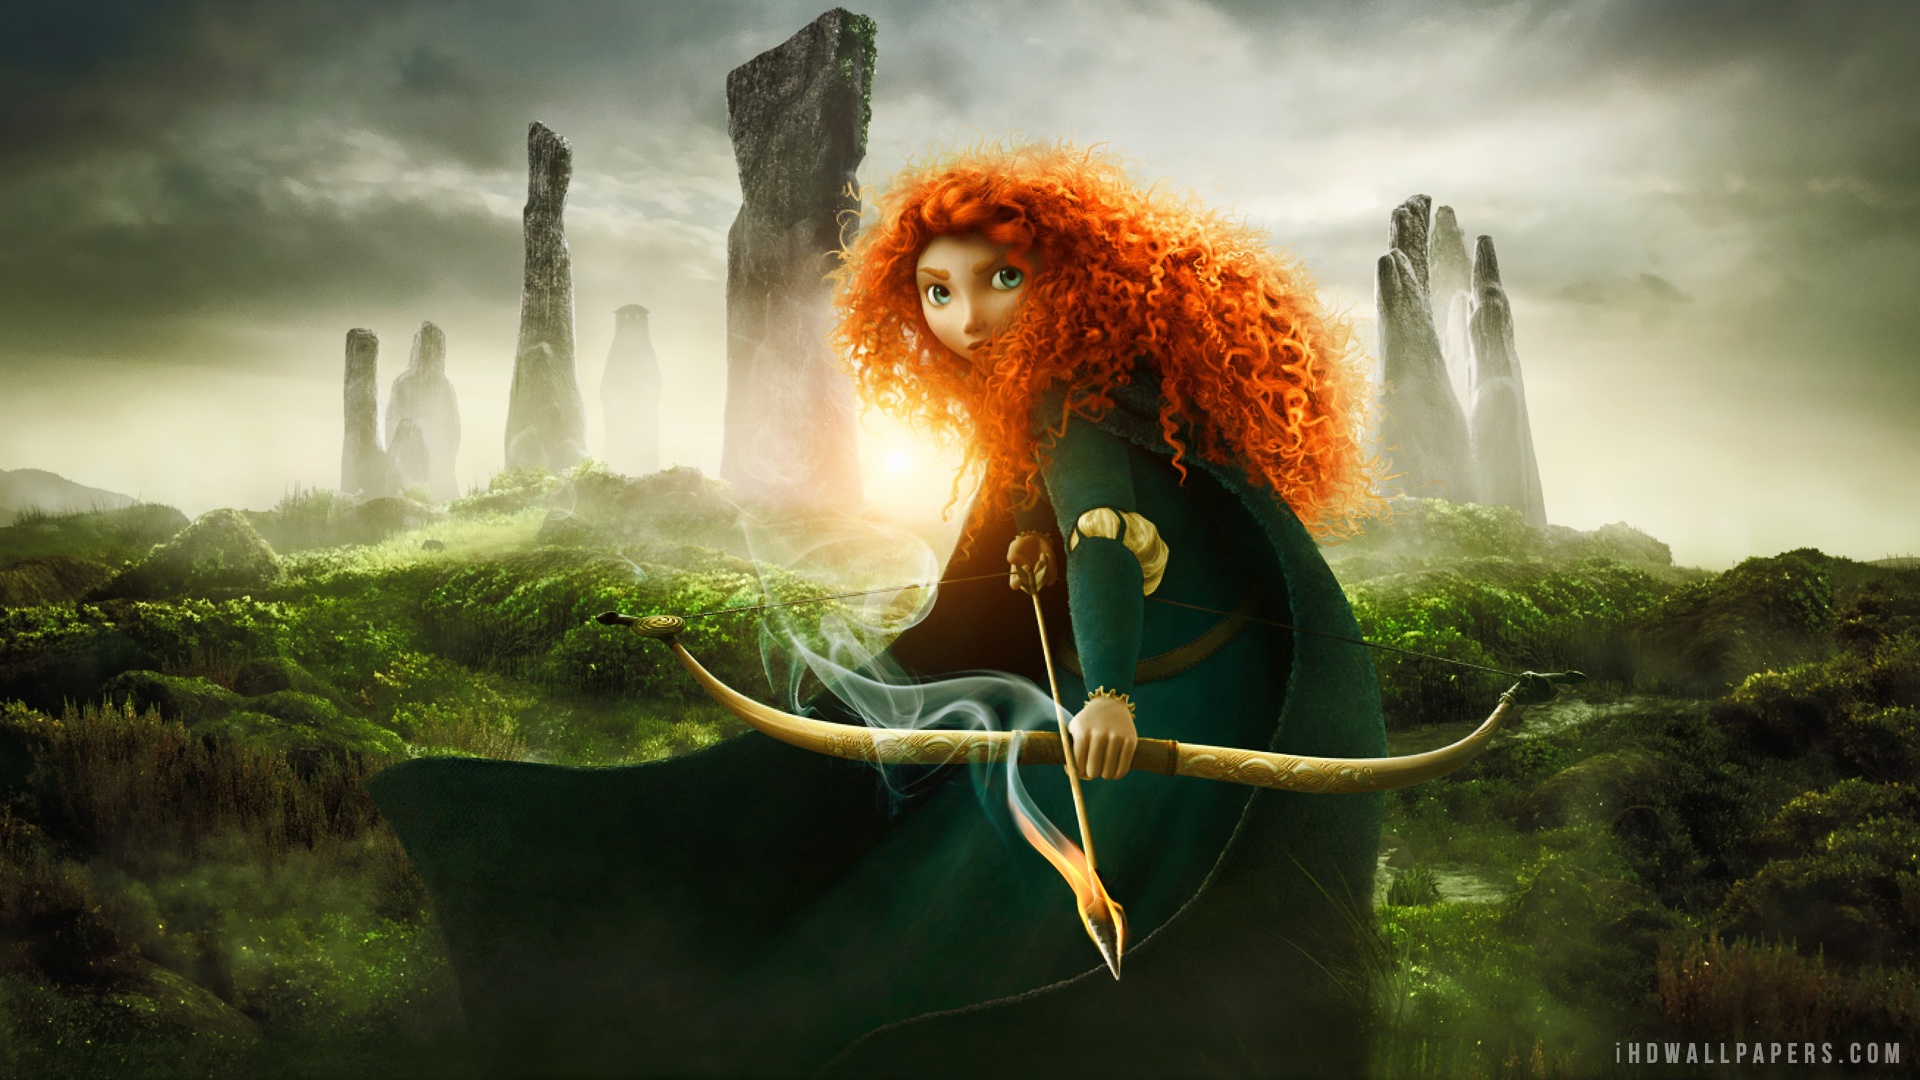 Brave Animation Movie HD Wallpaper - iHD Wallpapers